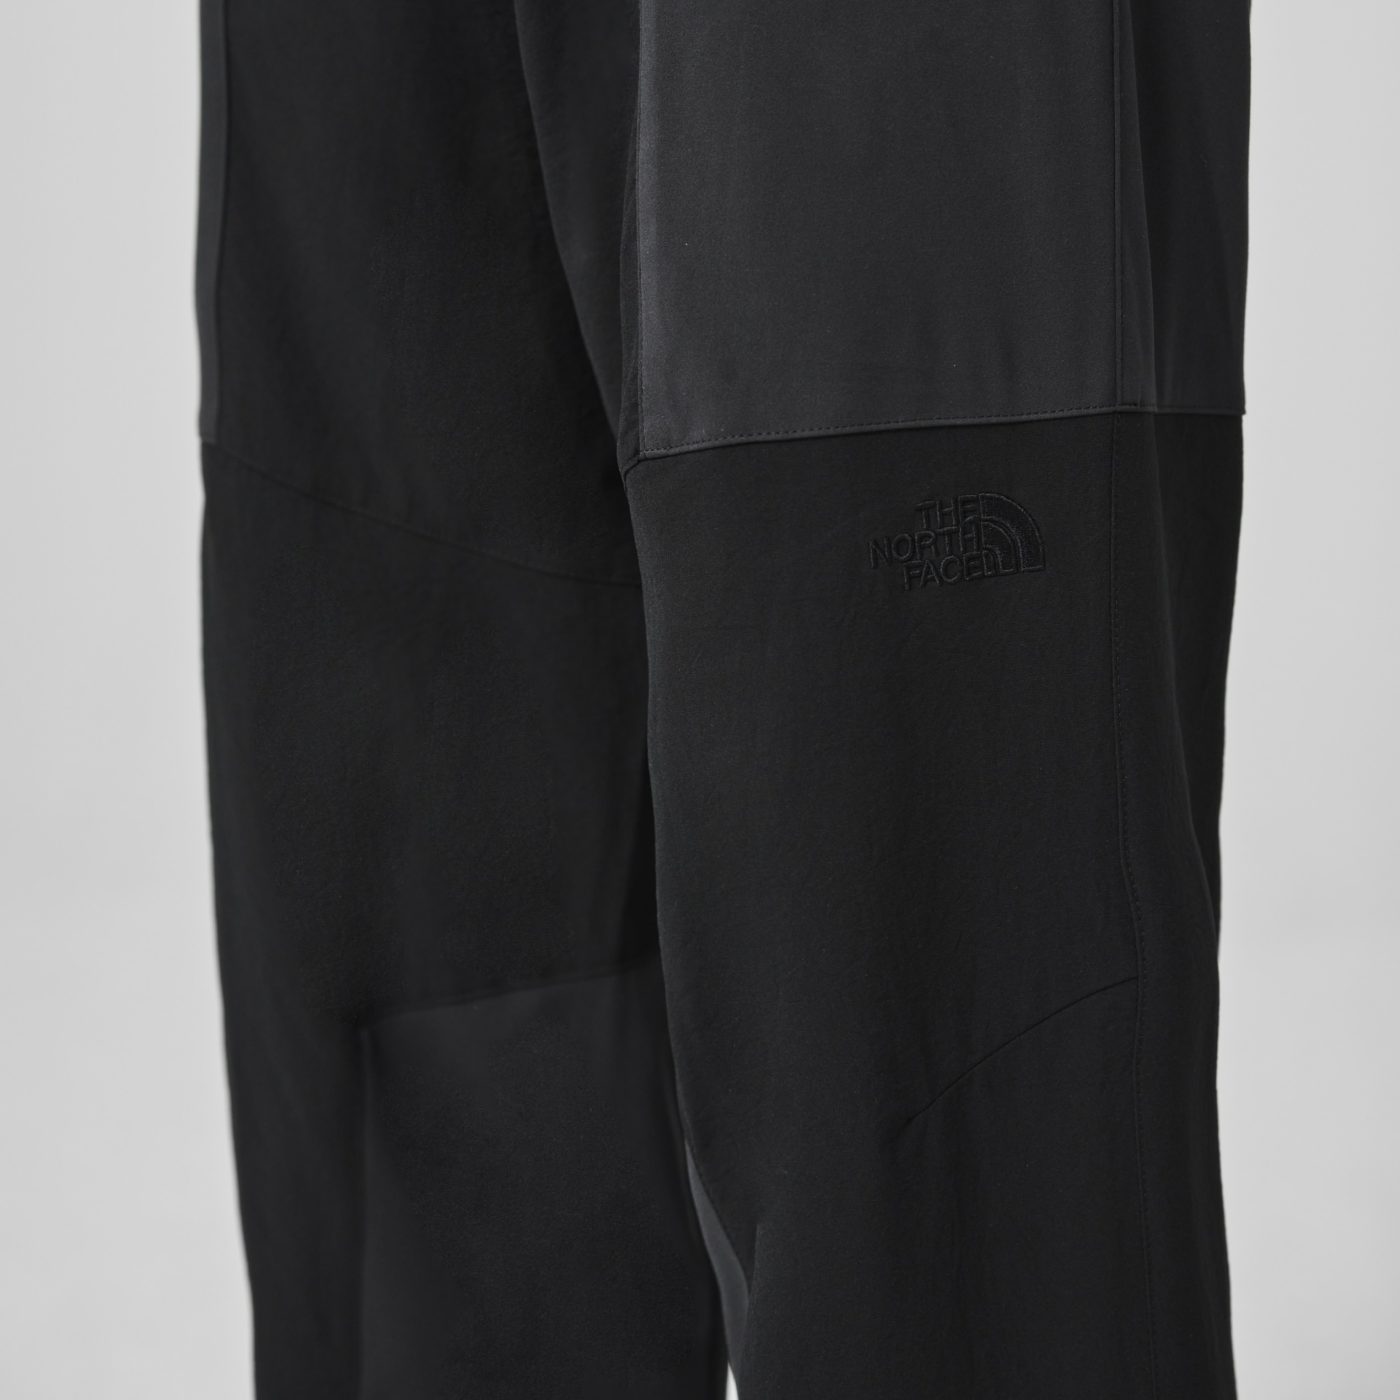 DETERMINATION PANT - THE NORTH FACE MOUNTAIN